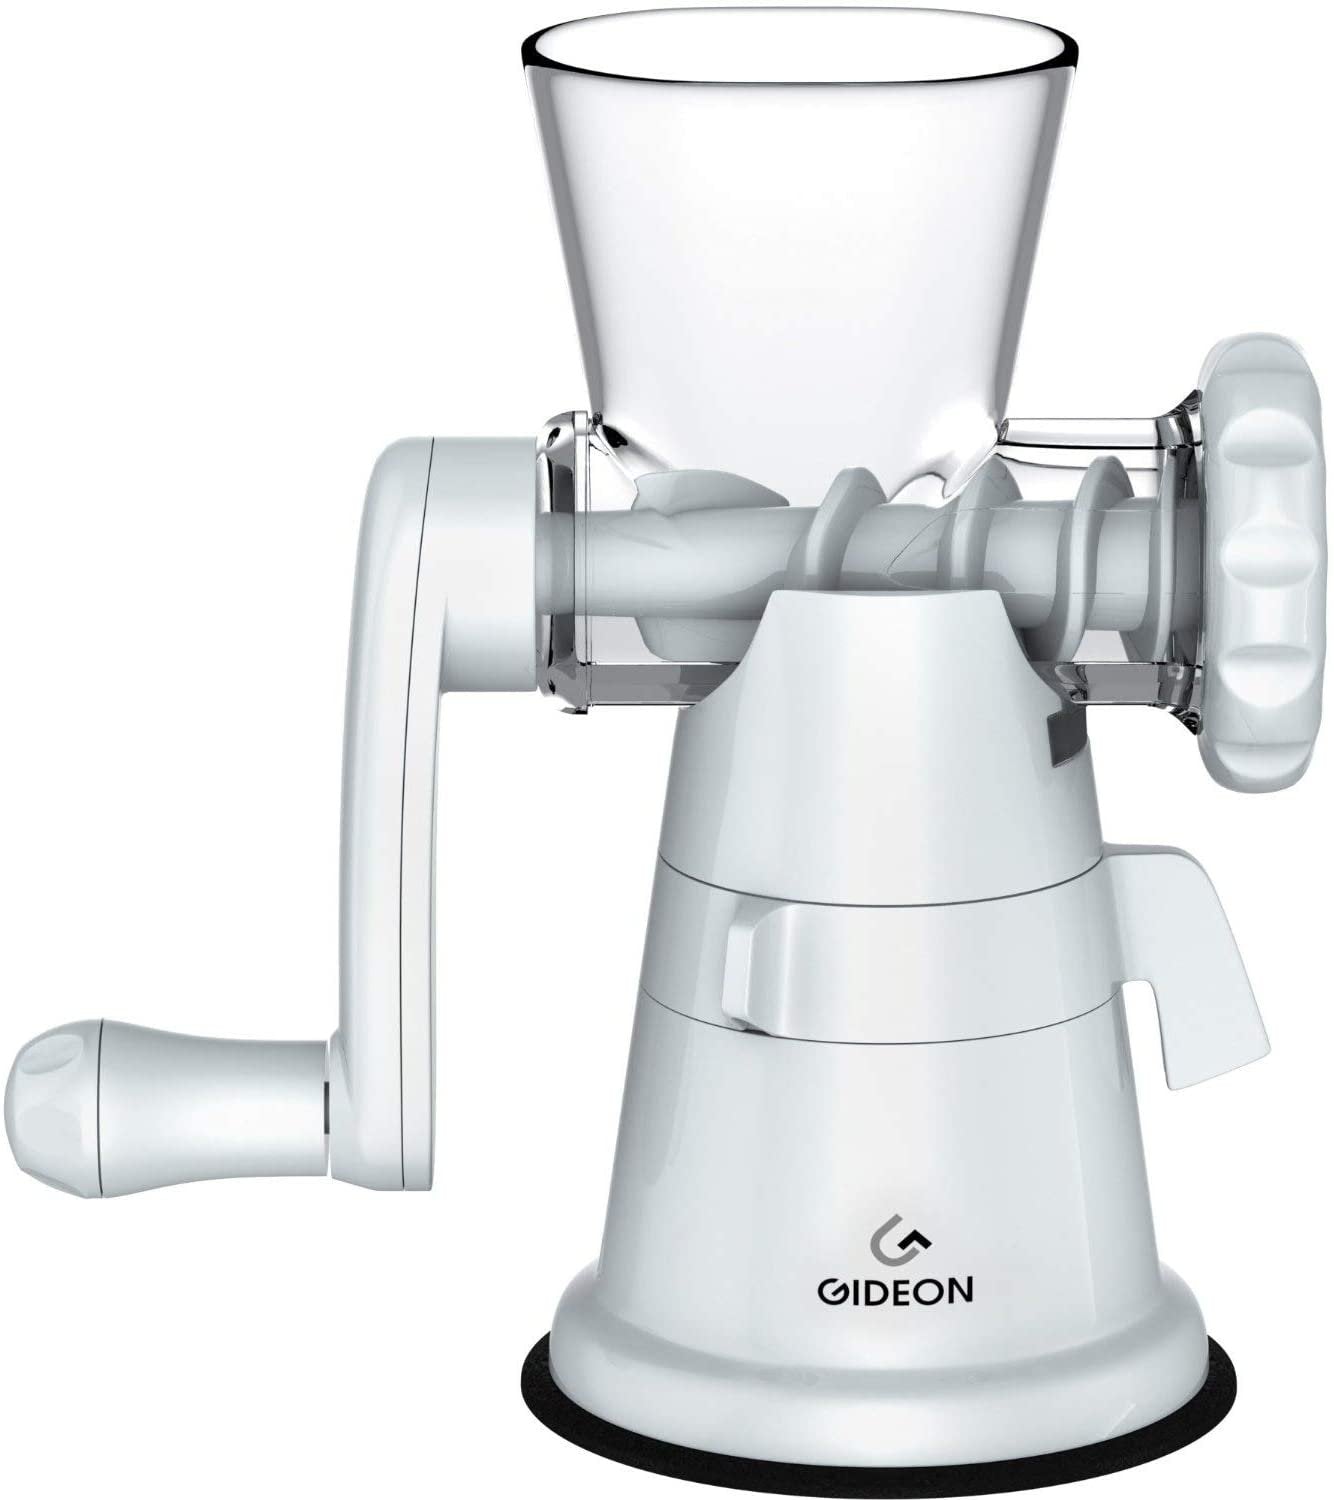 Gideon Manual Meat Grinder - Heavy Duty Stainless Steel Blades - Hand Crank - White - Size Options